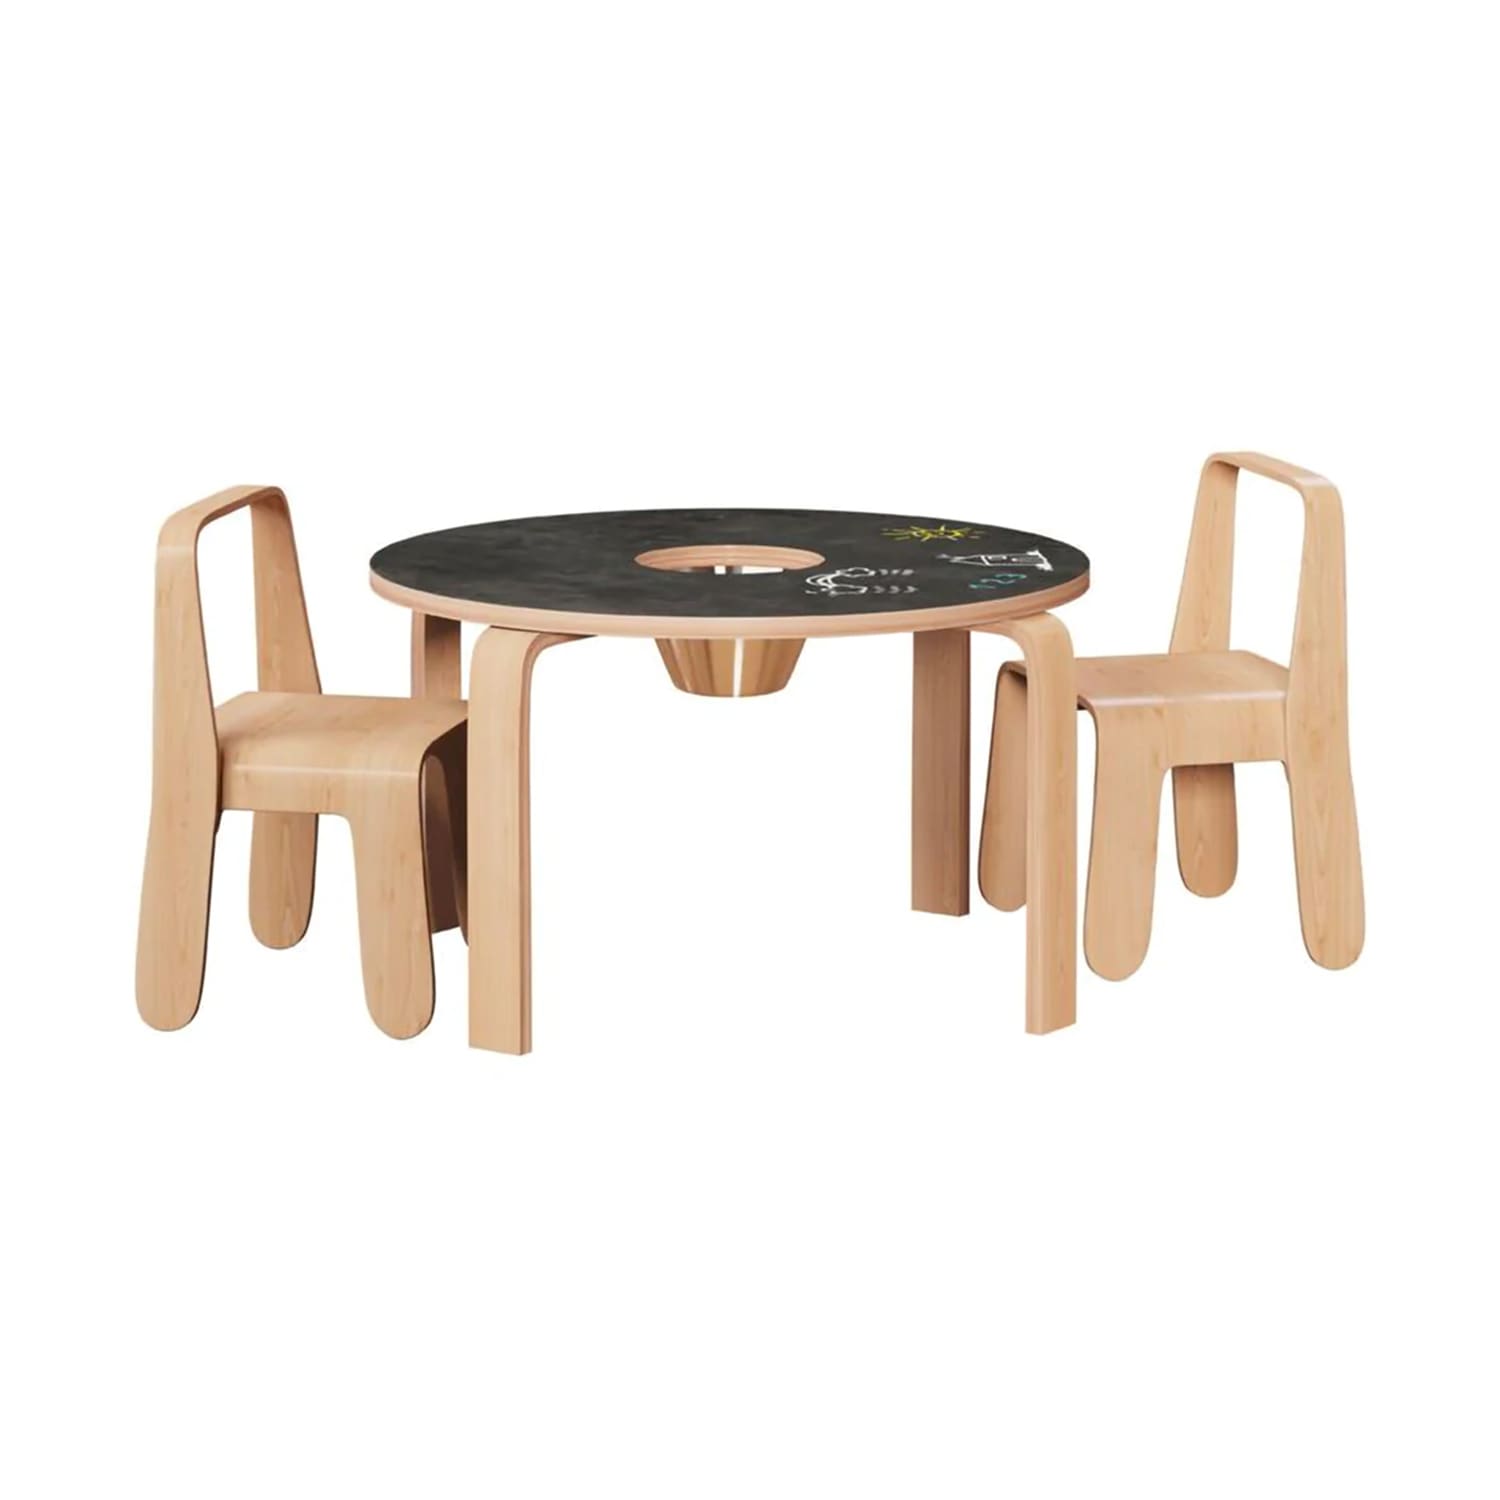 4 Best Art Table For Kids Ages 4-8s 2023